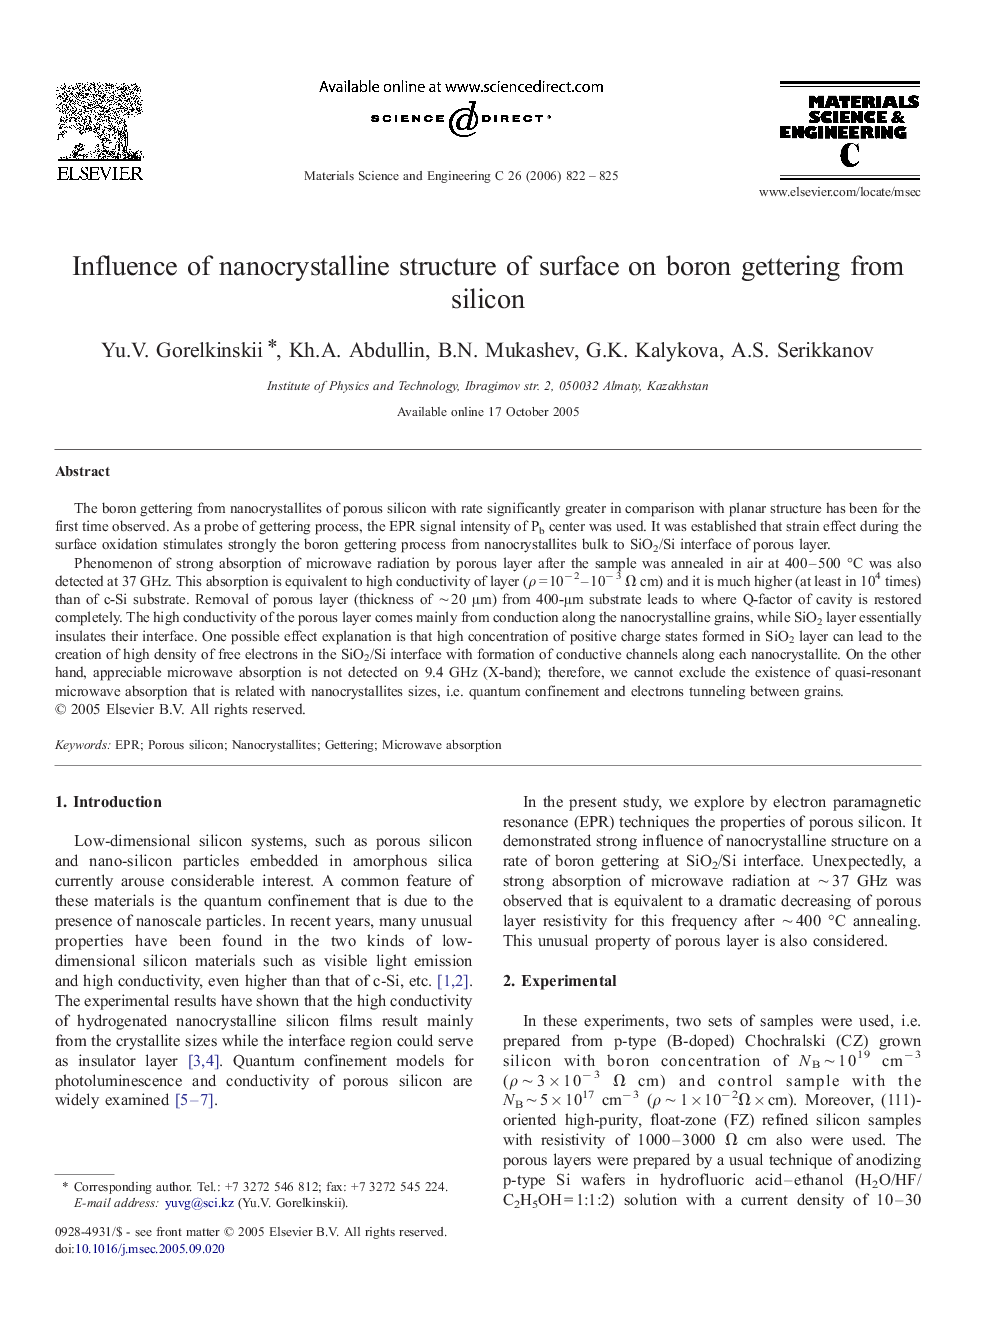 Influence of nanocrystalline structure of surface on boron gettering from silicon